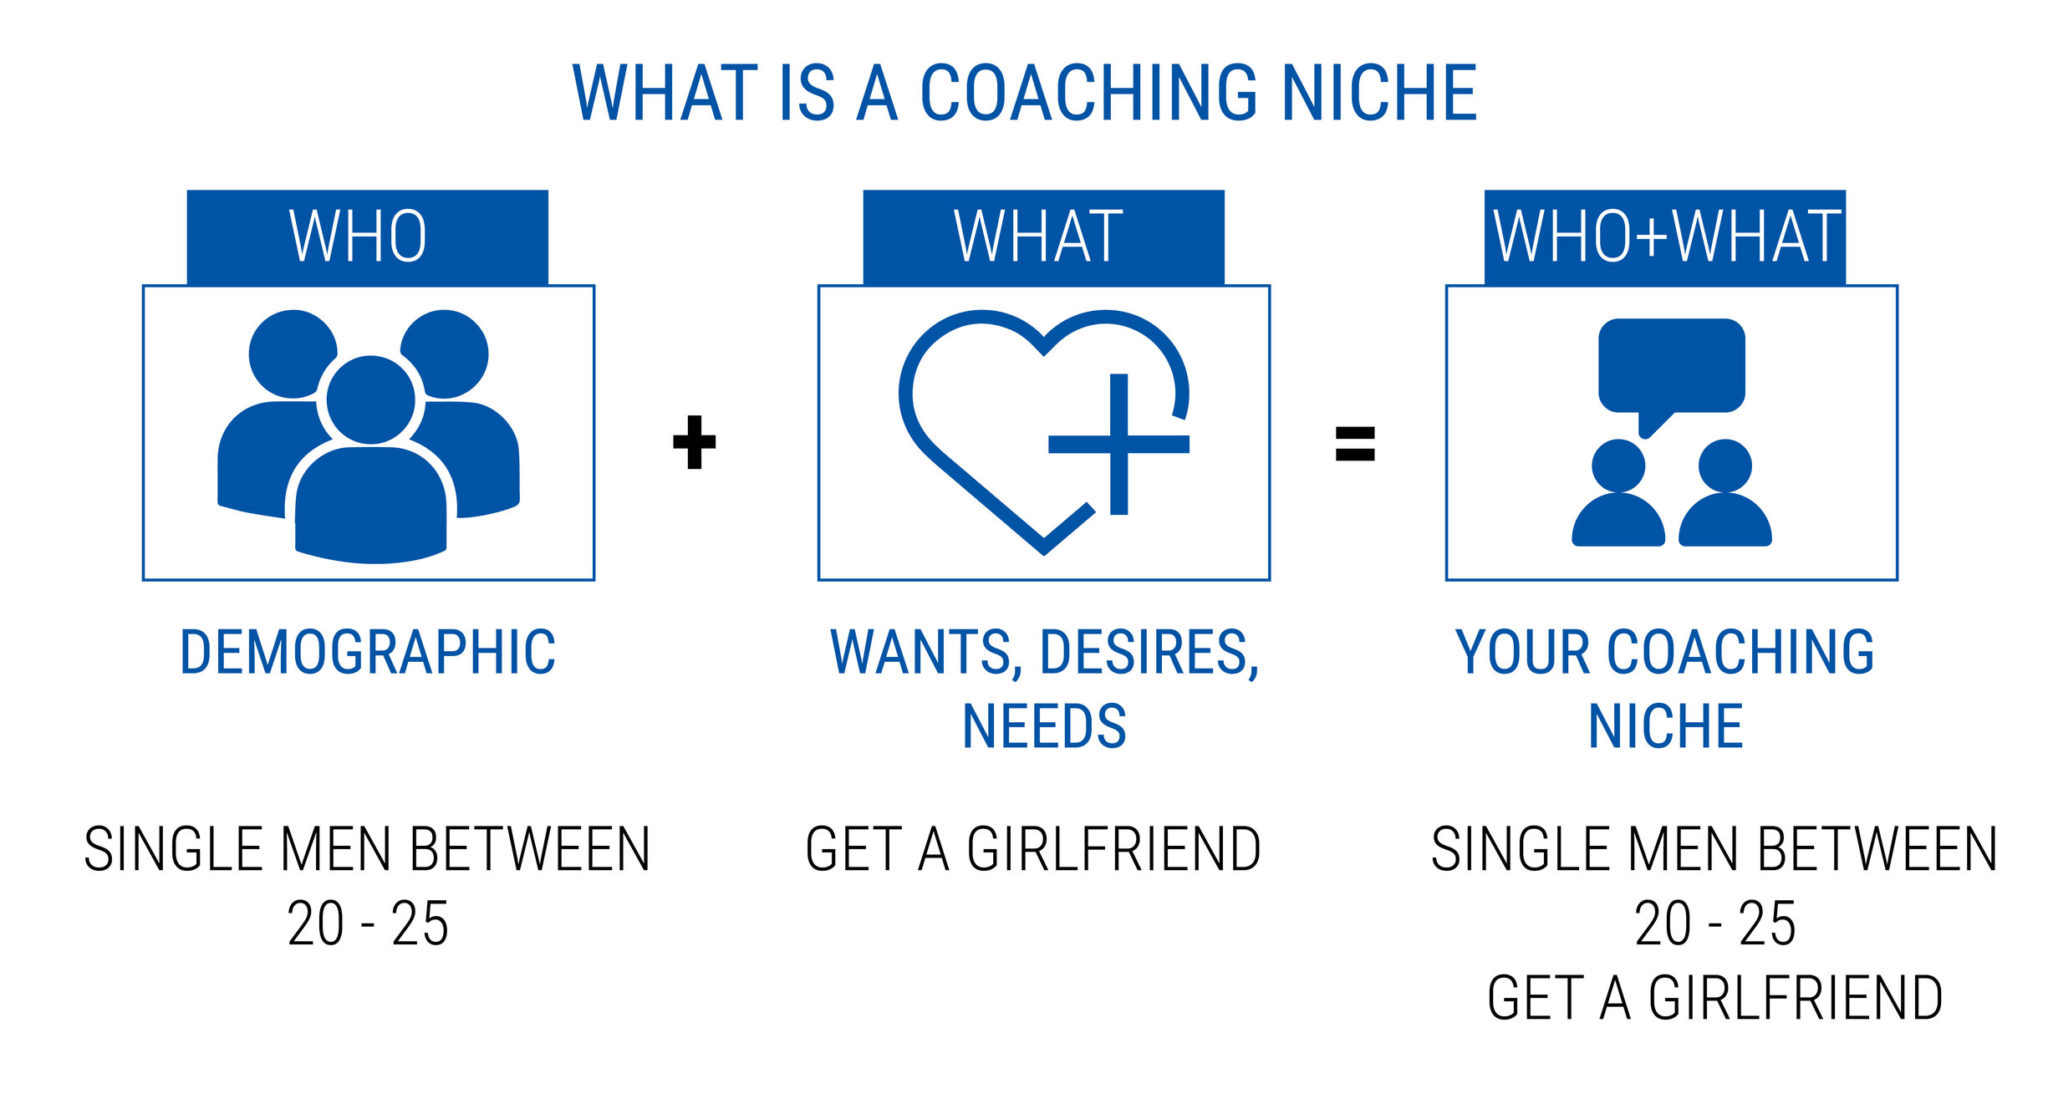 WHAT IS A COACHING NICHE